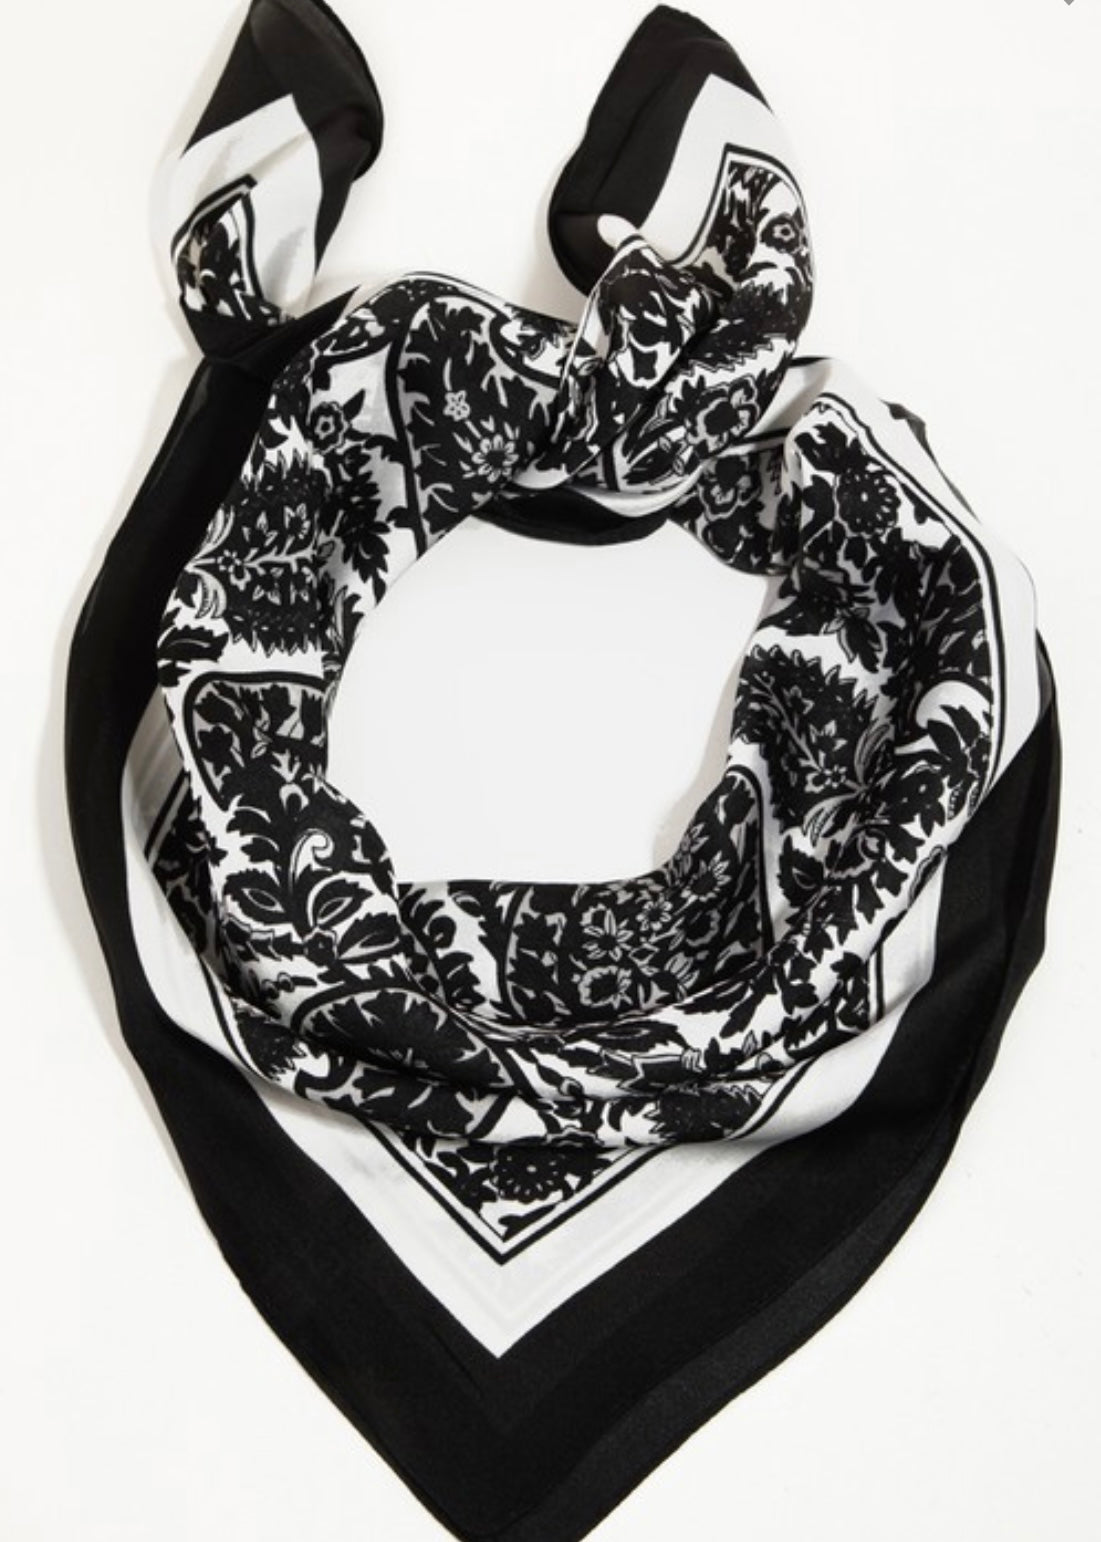 Floral Paisley Scarf